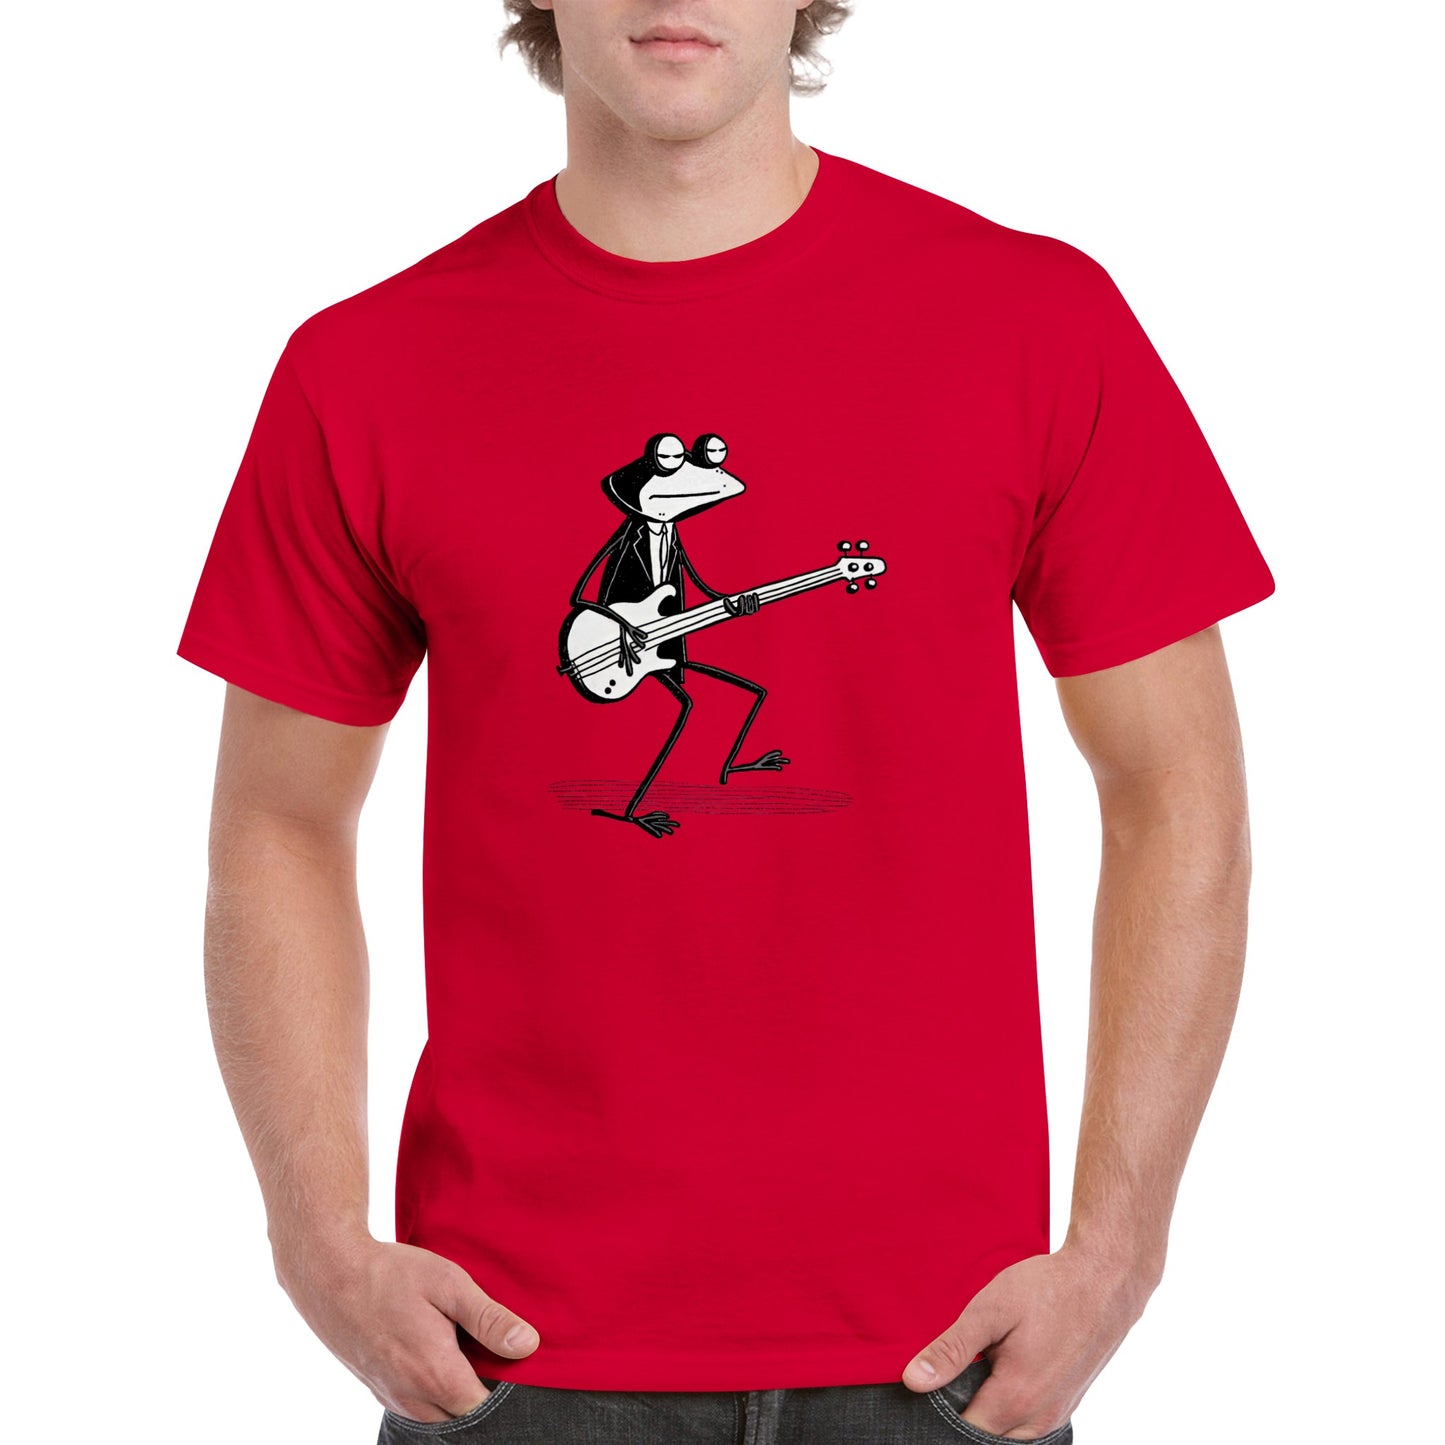 Frog in a suit playing a bass guitar Heavyweight Unisex Crewneck T-shirt